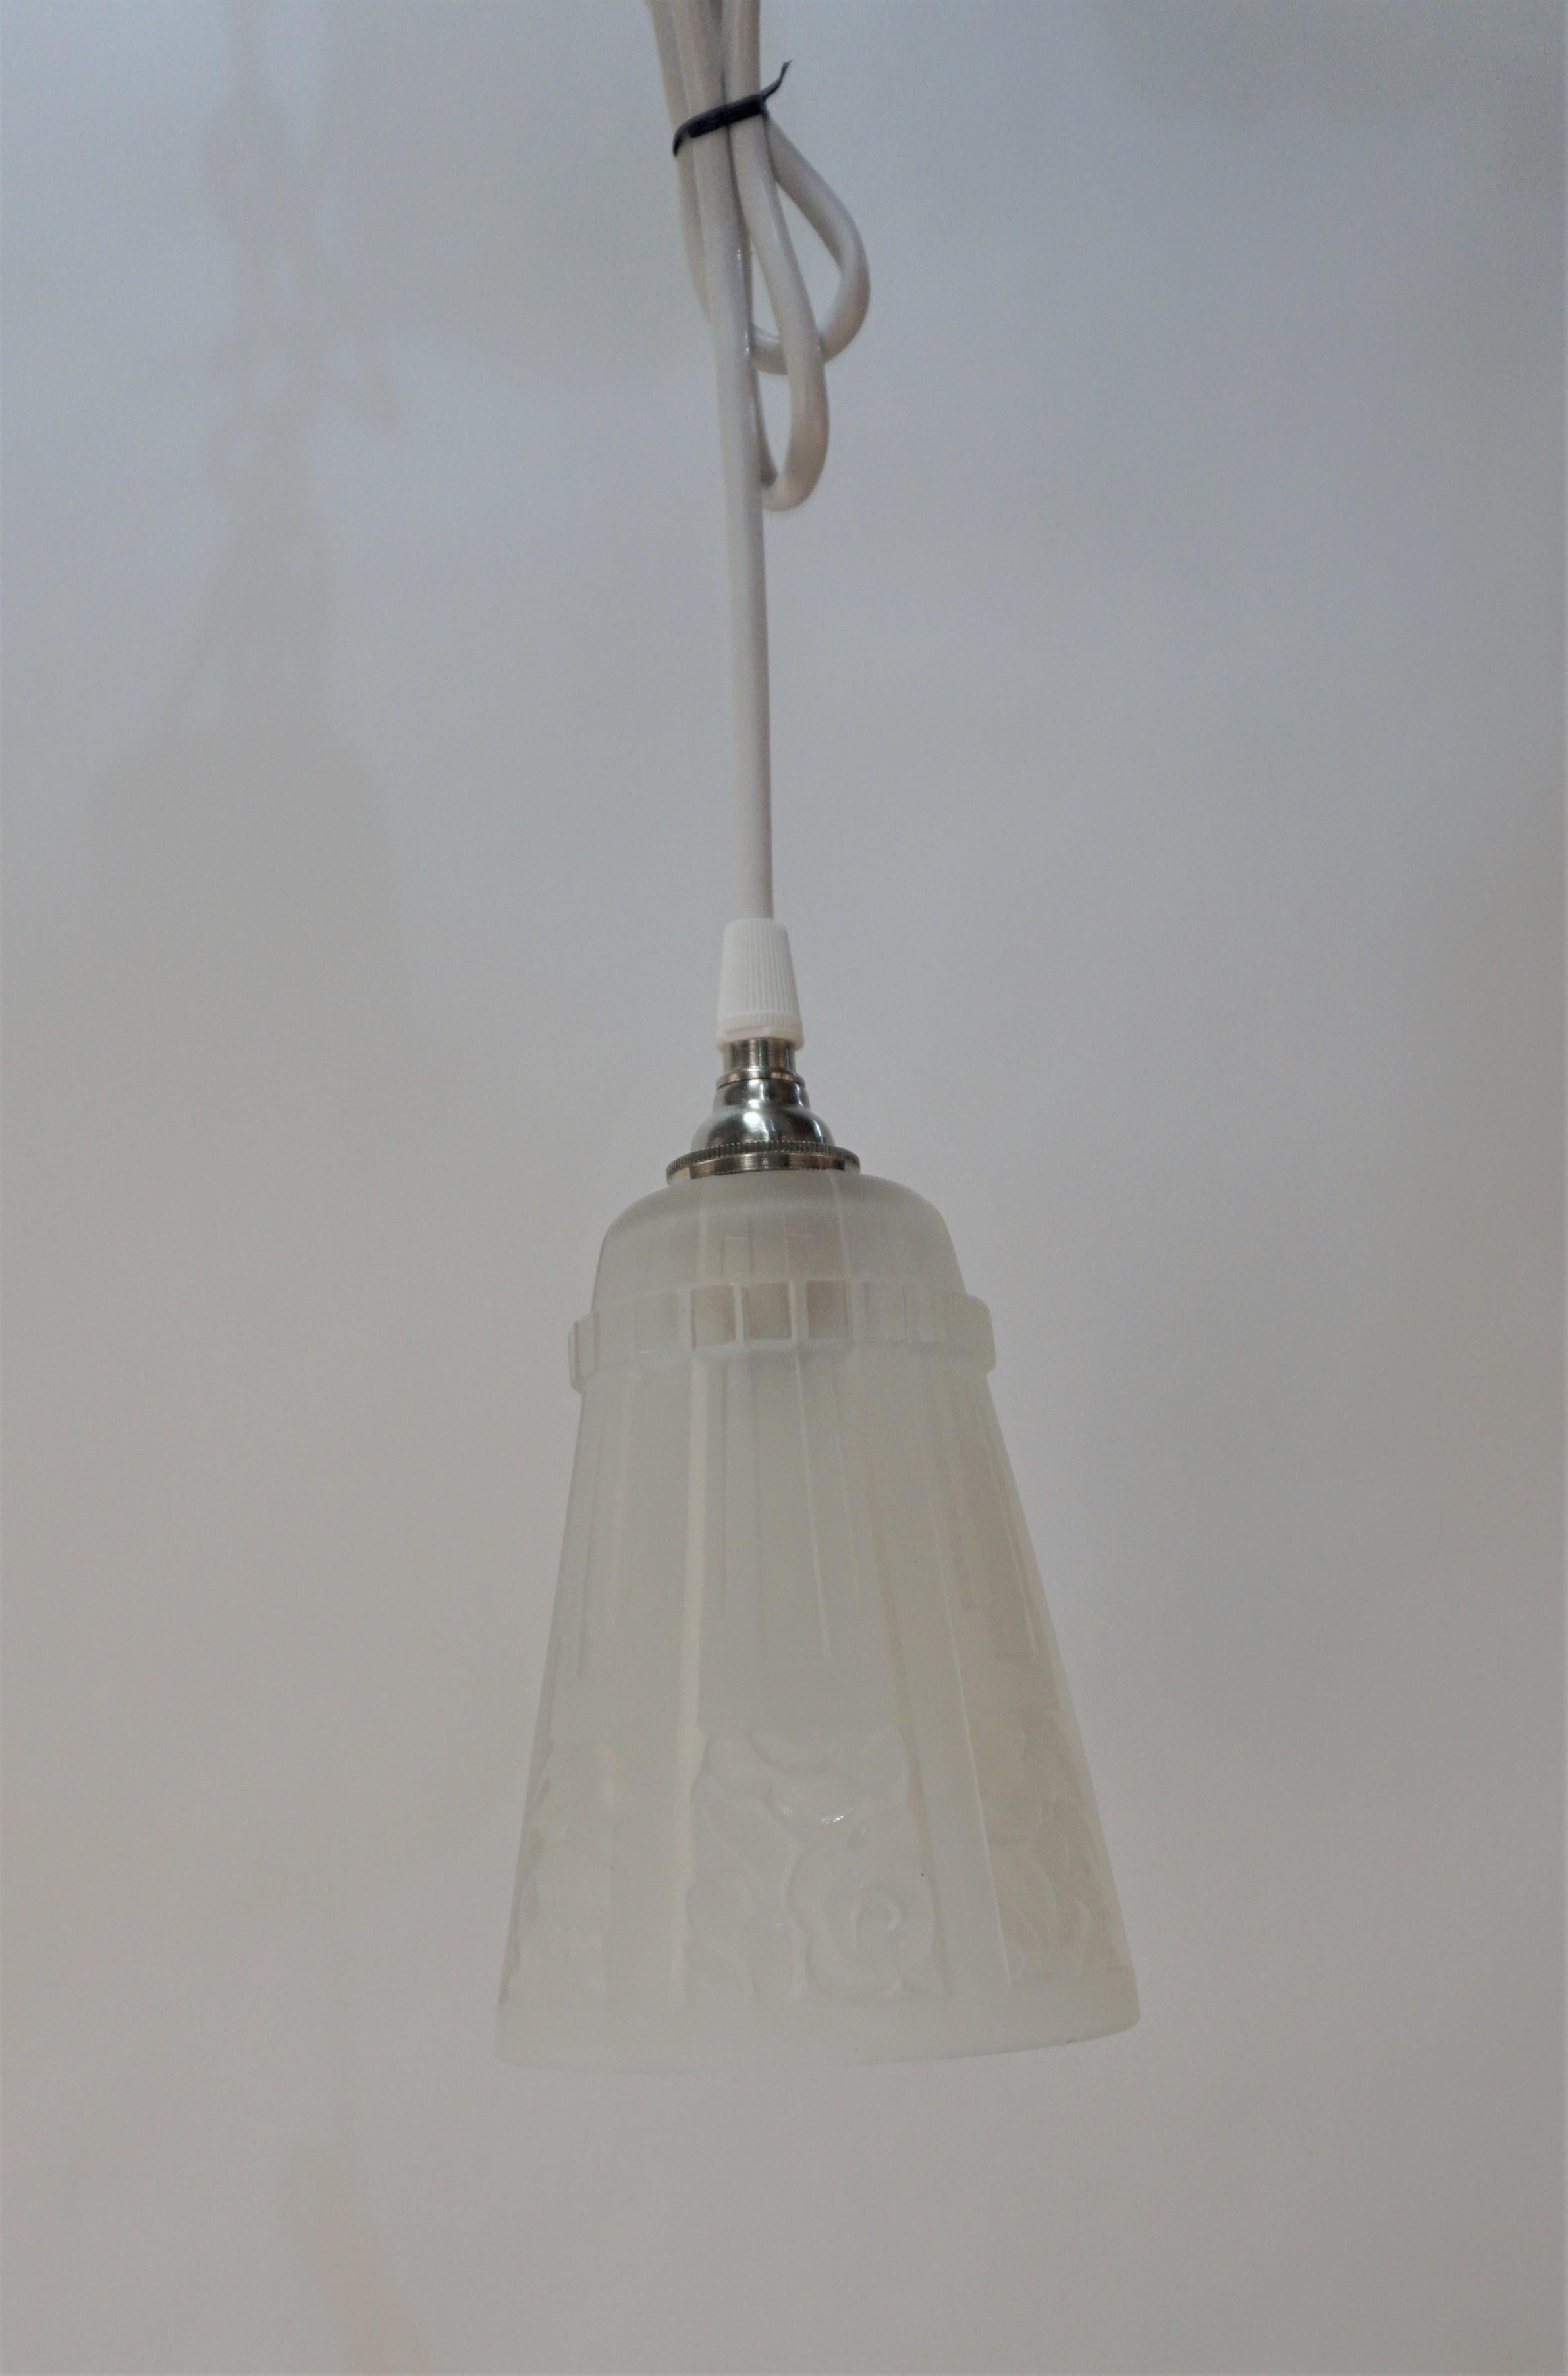 Set of Three 1920s Art Deco Glass Shade Pendant Light #7 In Good Condition For Sale In Fairfax, VA